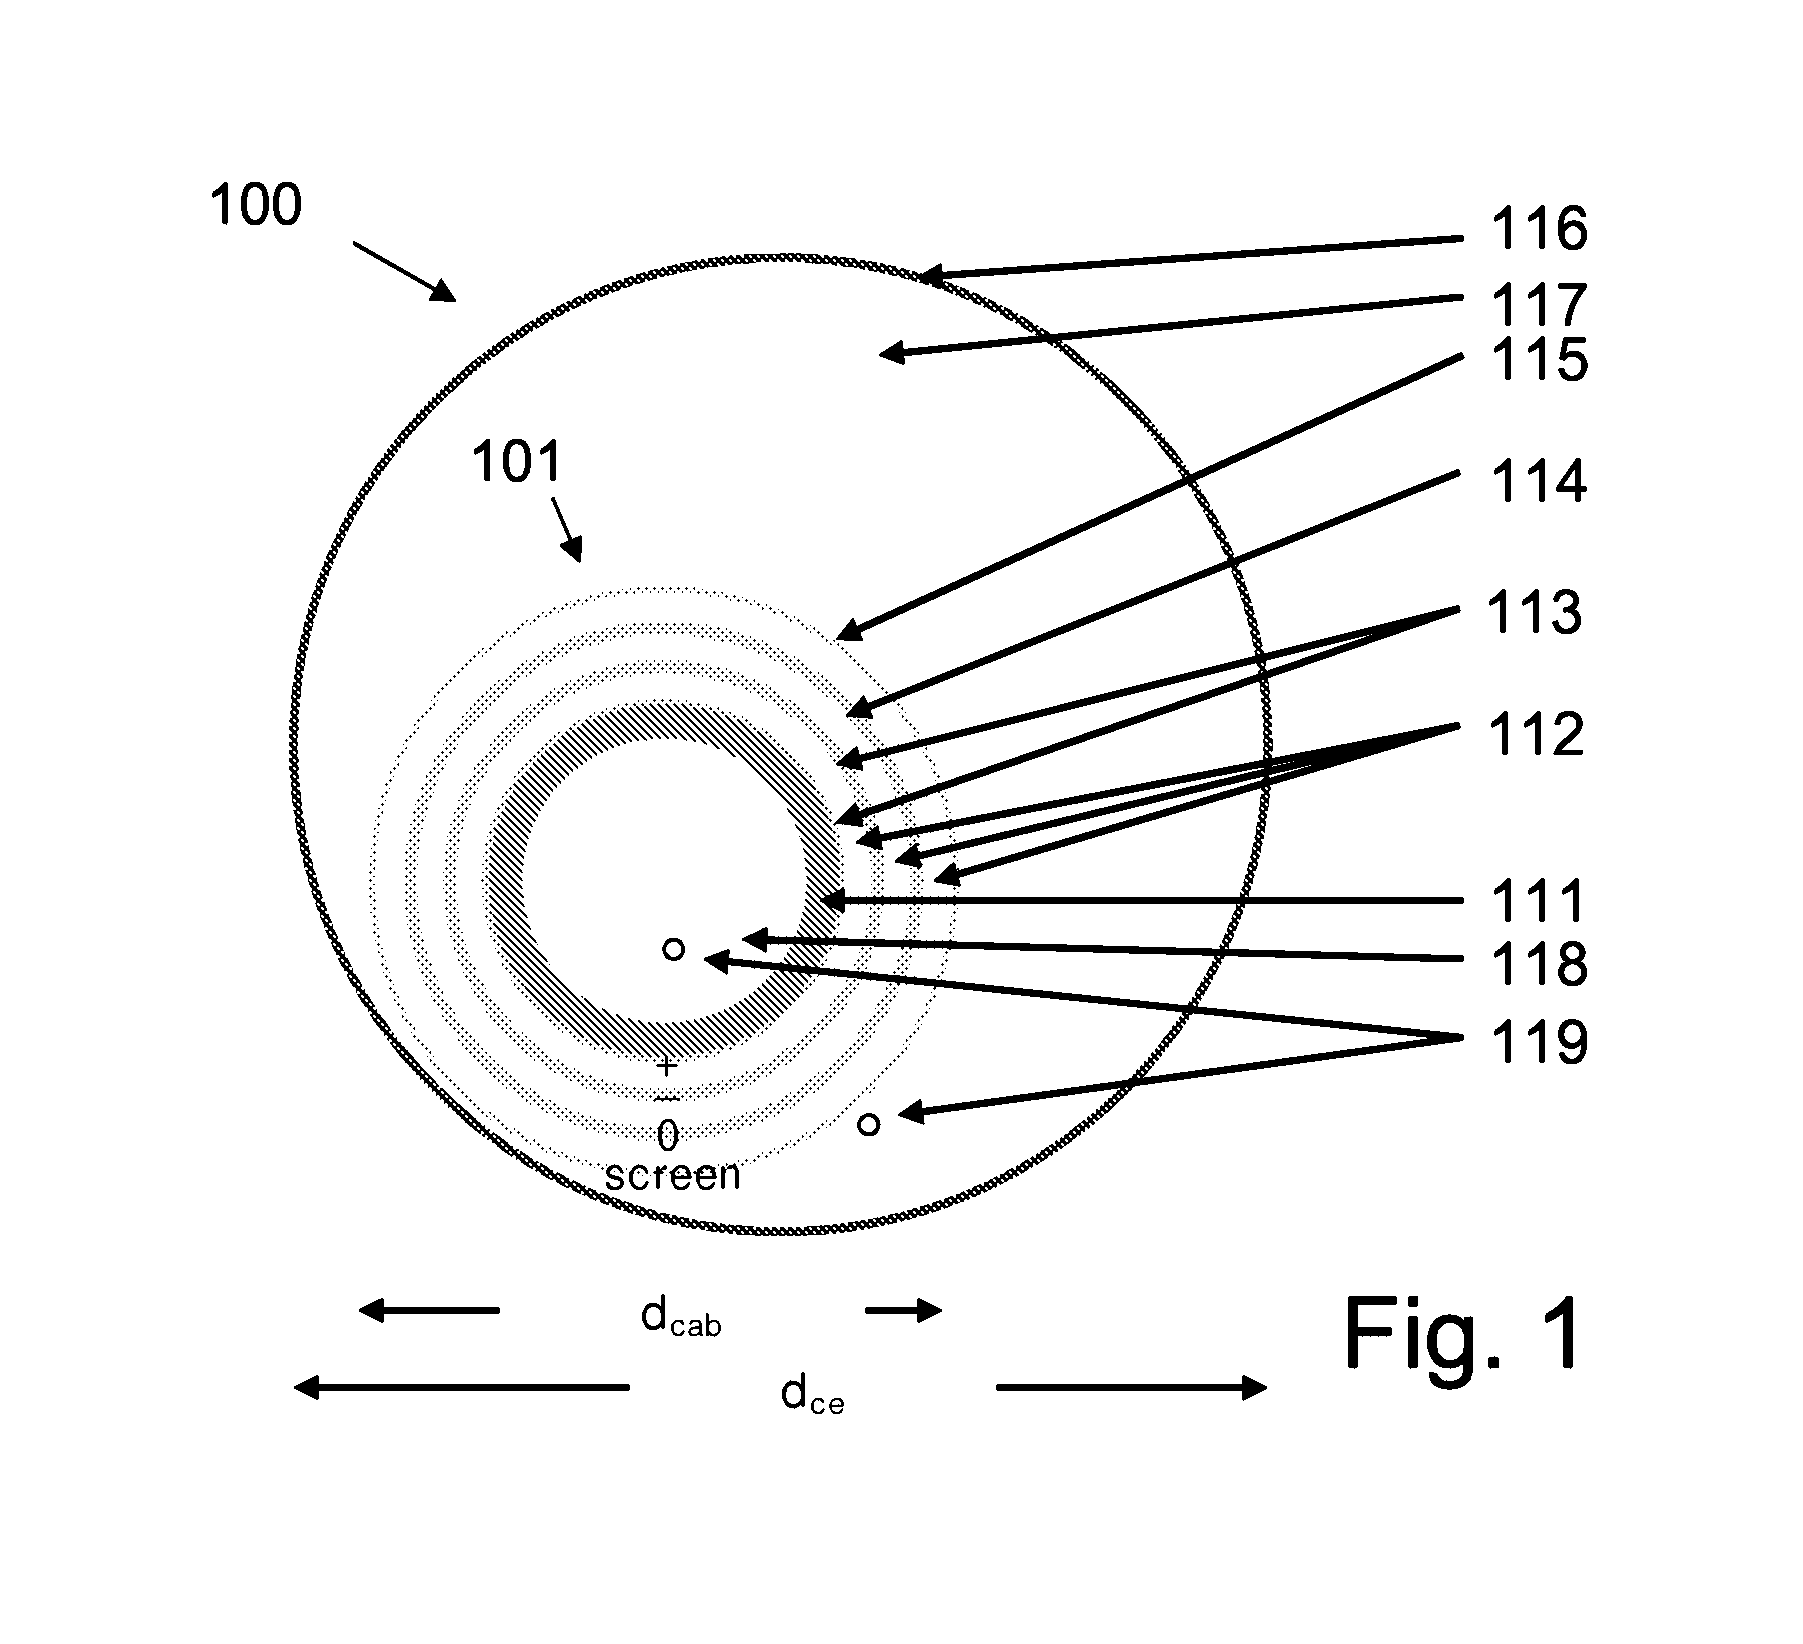 Superconductive multi-phase cable system, a method of its manufacture and its use